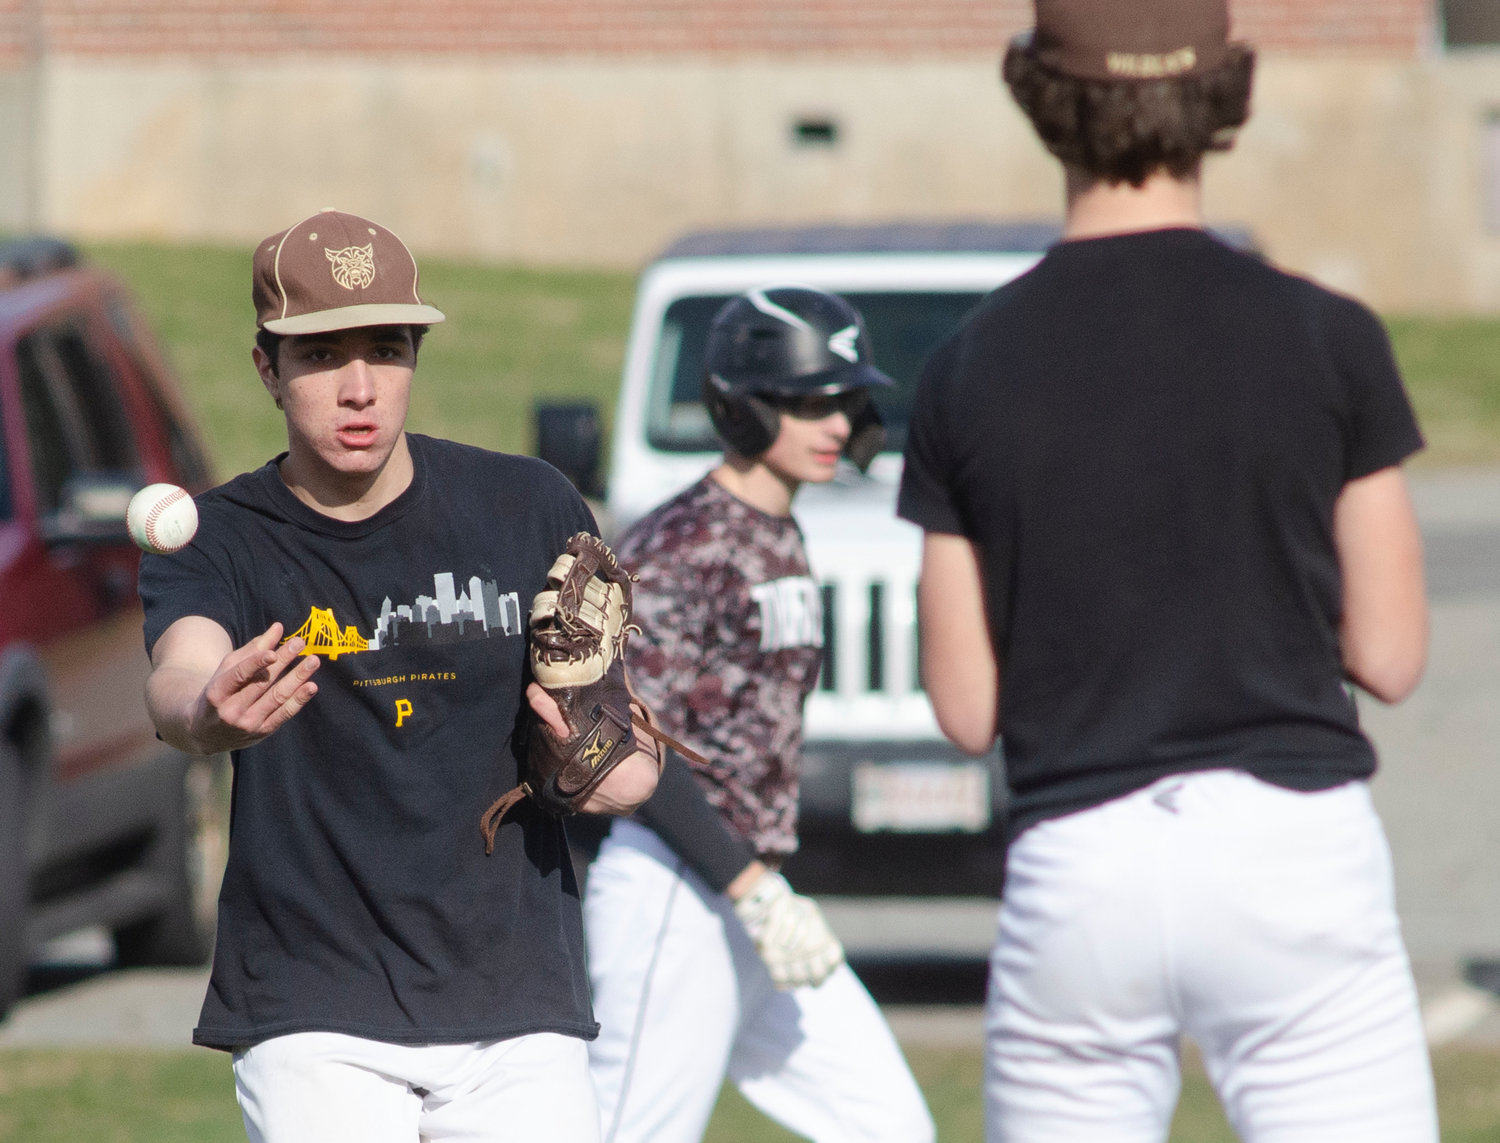 Max Morotti playing first base, flips the ball to pitcher Max Gallant after recording an out.